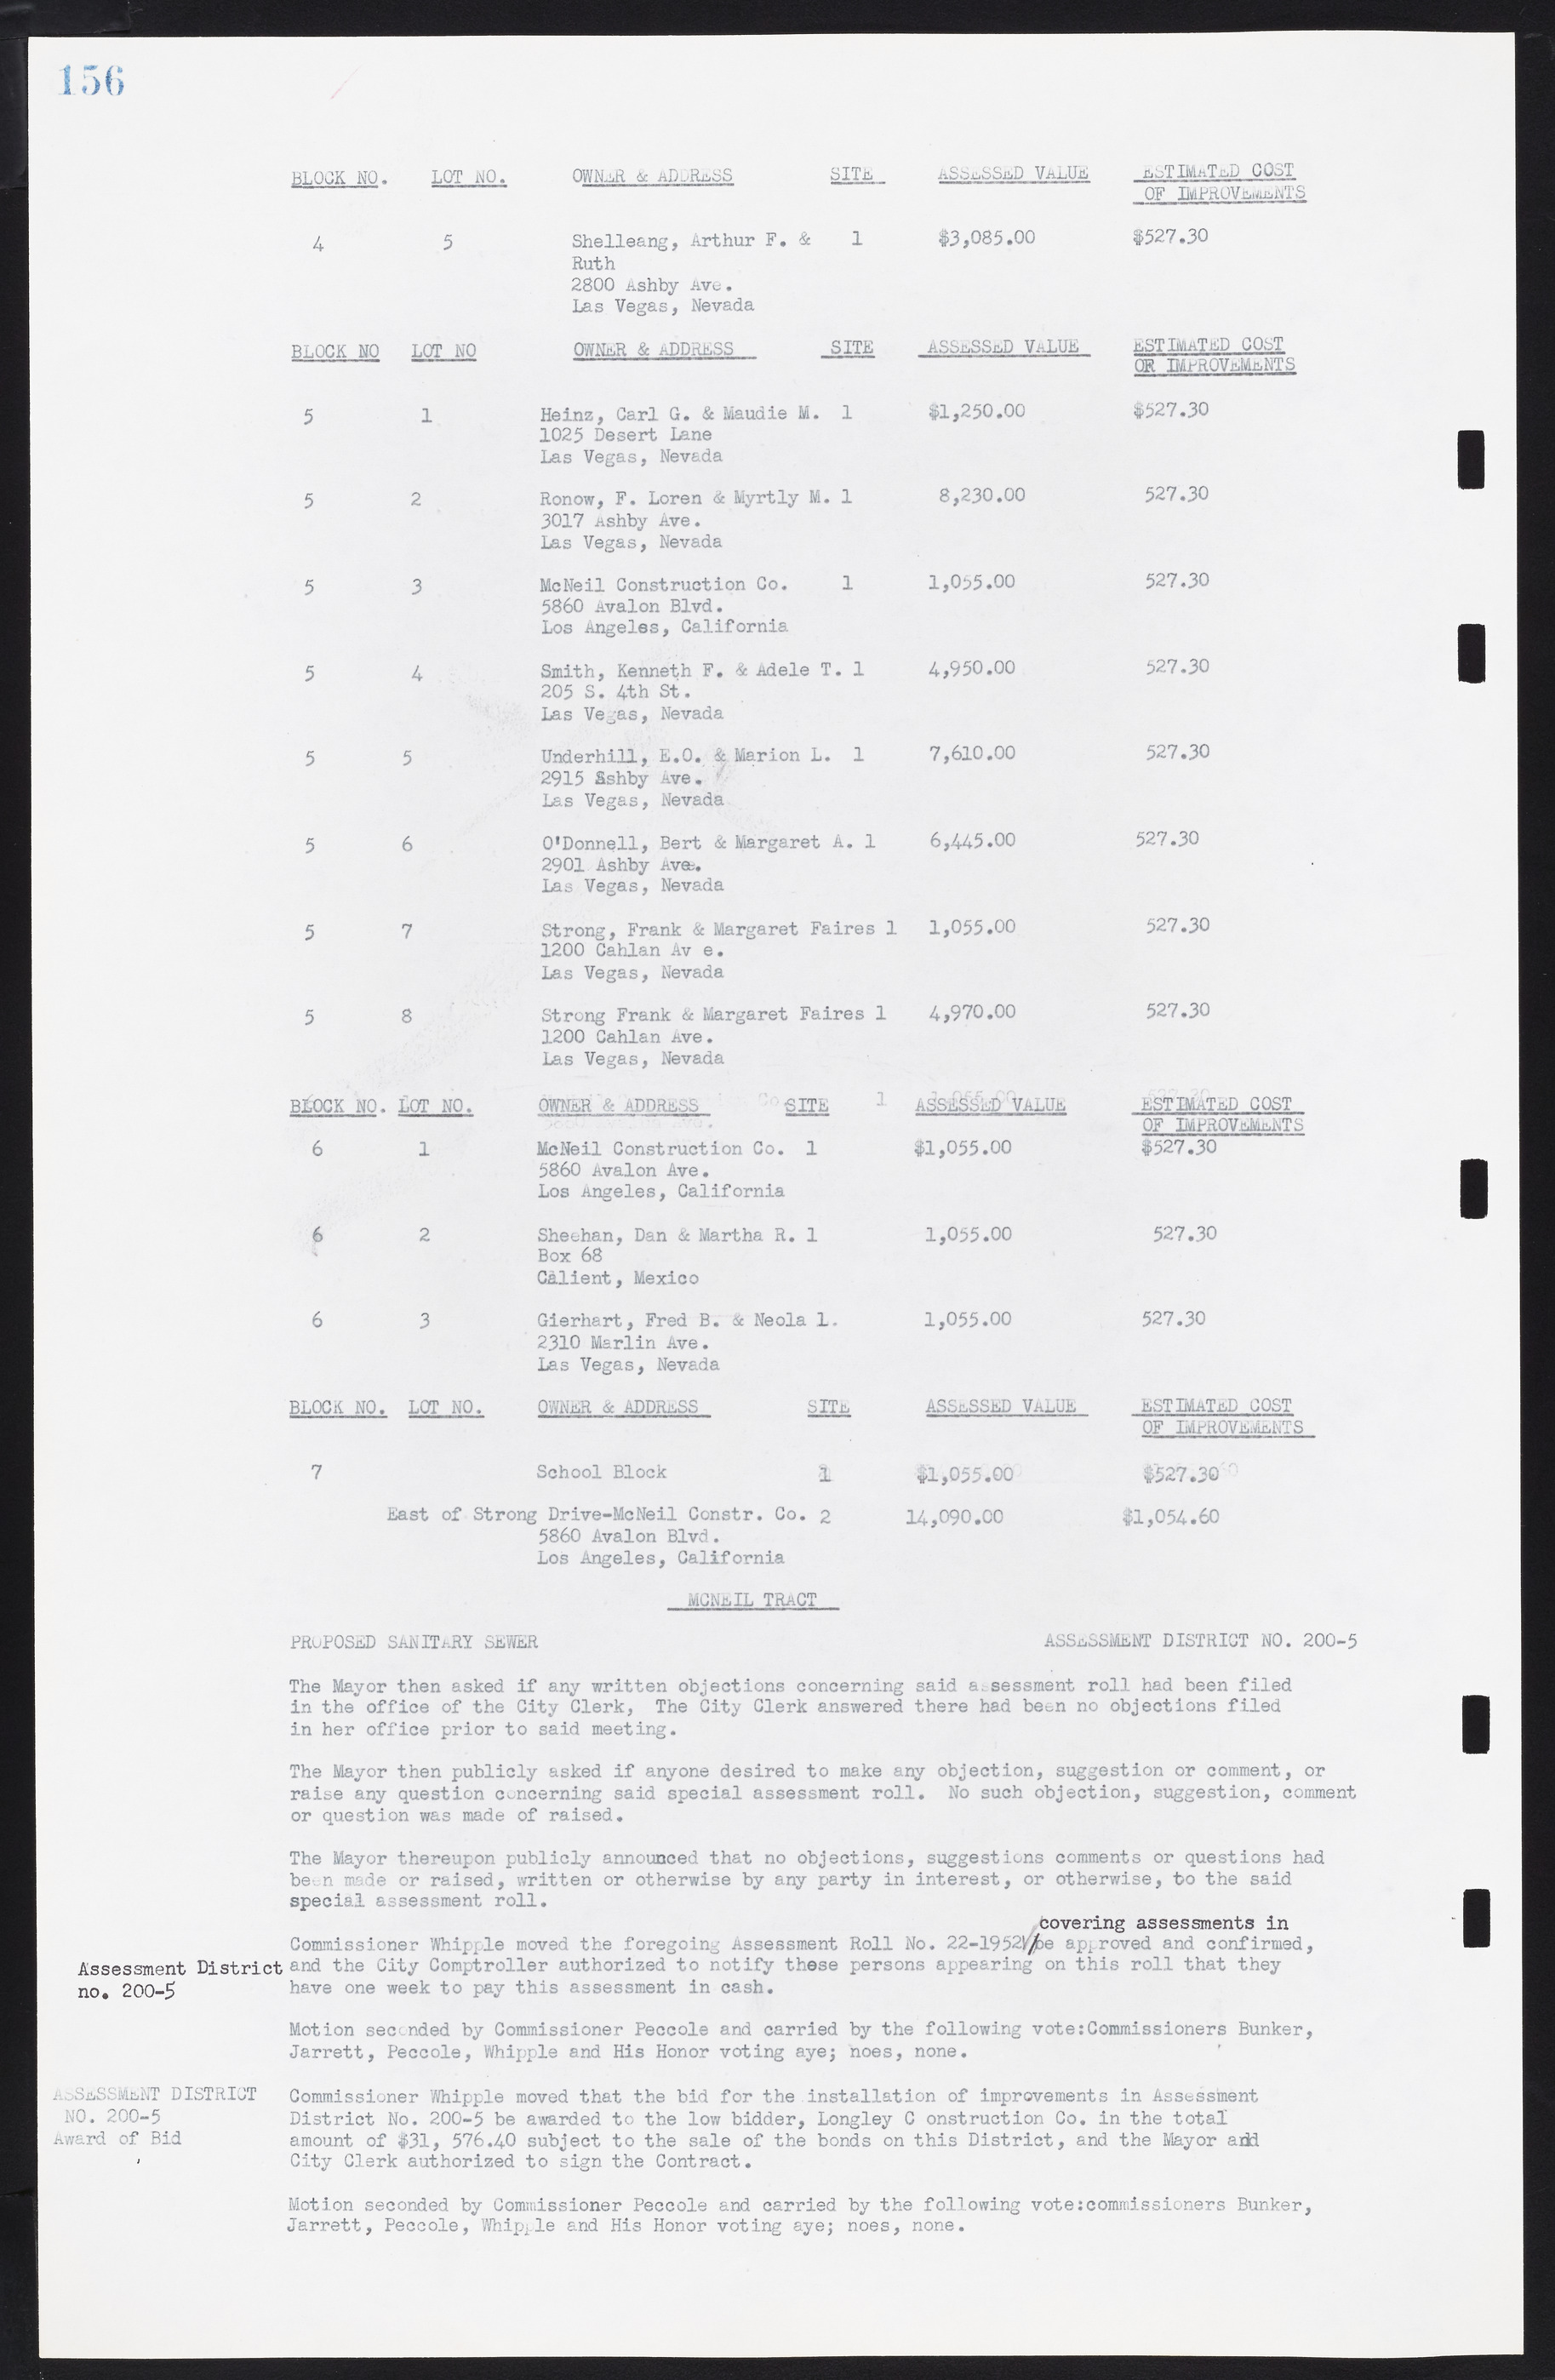 Las Vegas City Commission Minutes, May 26, 1952 to February 17, 1954, lvc000008-170